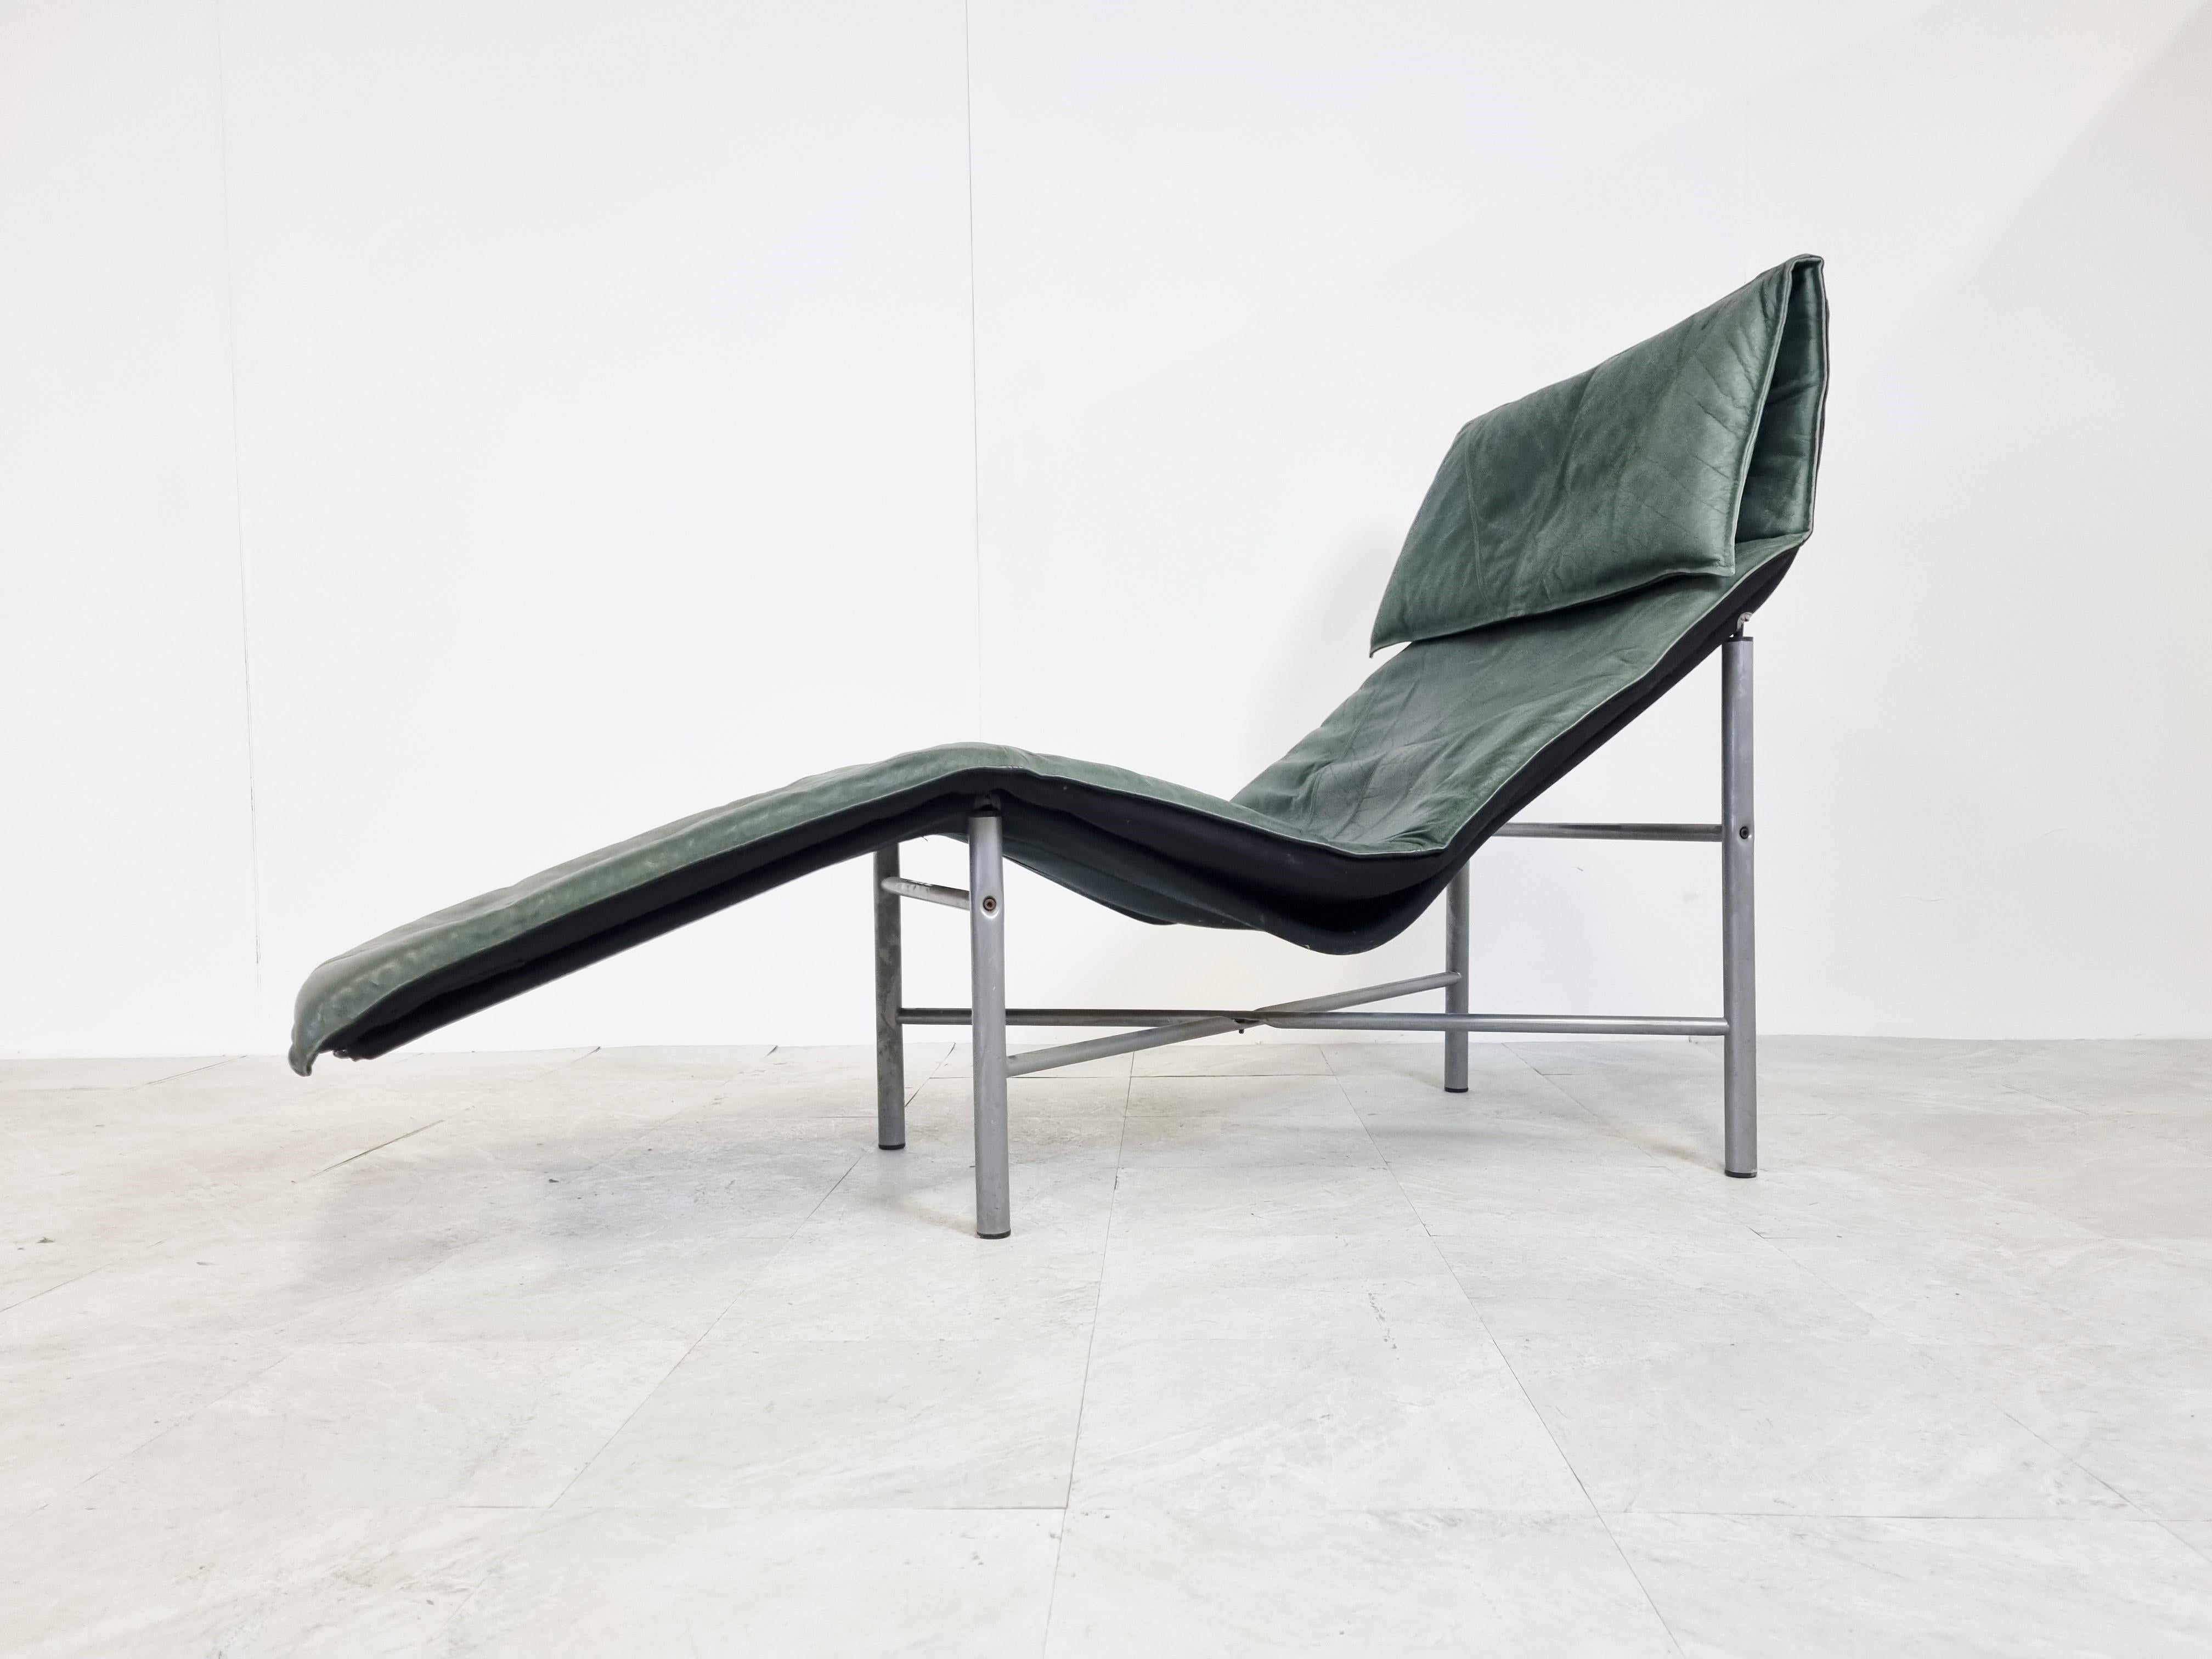 Vintage 'chaise longue' model 'skye' designed by Tord Björklund for Ikea in the 1980s.

The chair is amazingly comfortable and is in good condition.

Dark green leather

1980s - Sweden.

Dimensions:
Width 155 cm
Depth 69 cm
Height 96